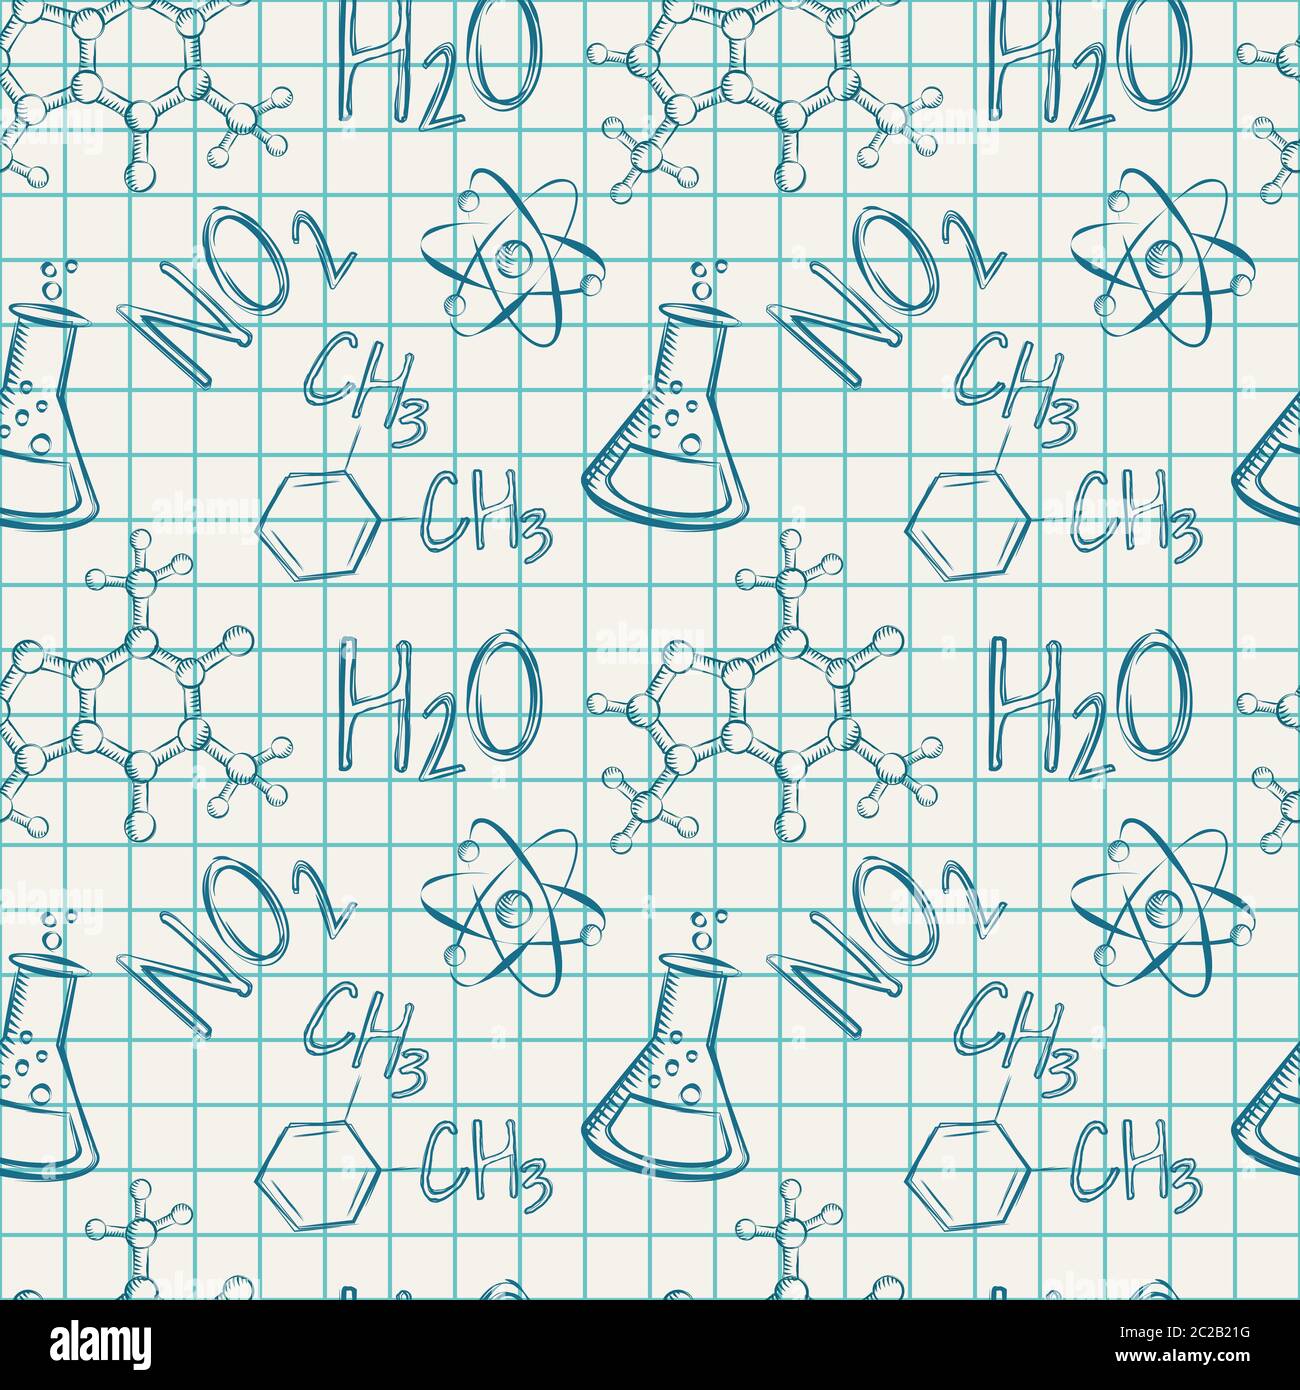 Science seamless pattern. Chemical drawings in a school notebook. Vector illustration. Stock Vector